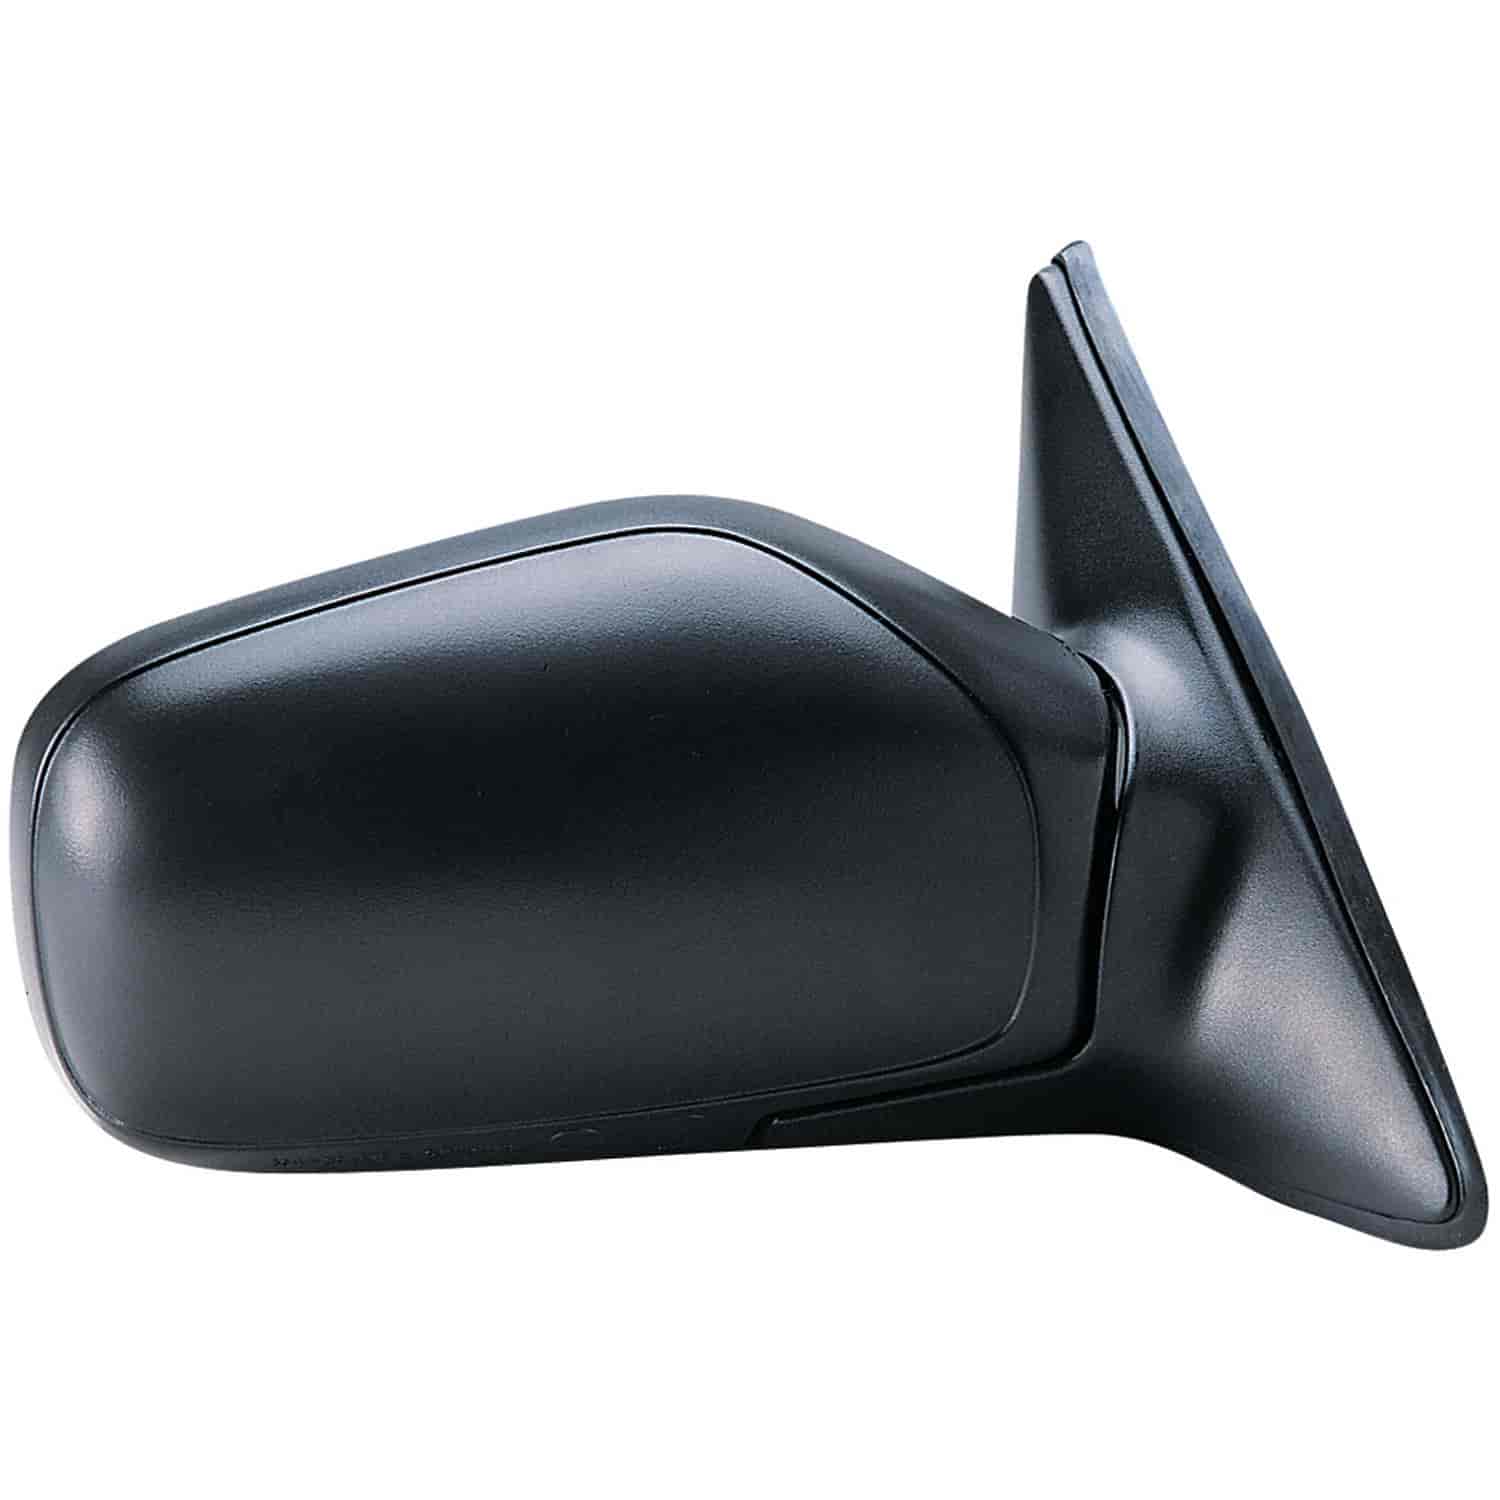 OEM Style Replacement mirror for 91-94 Nissan Sentra Sedan Japan built passenger side mirror tested